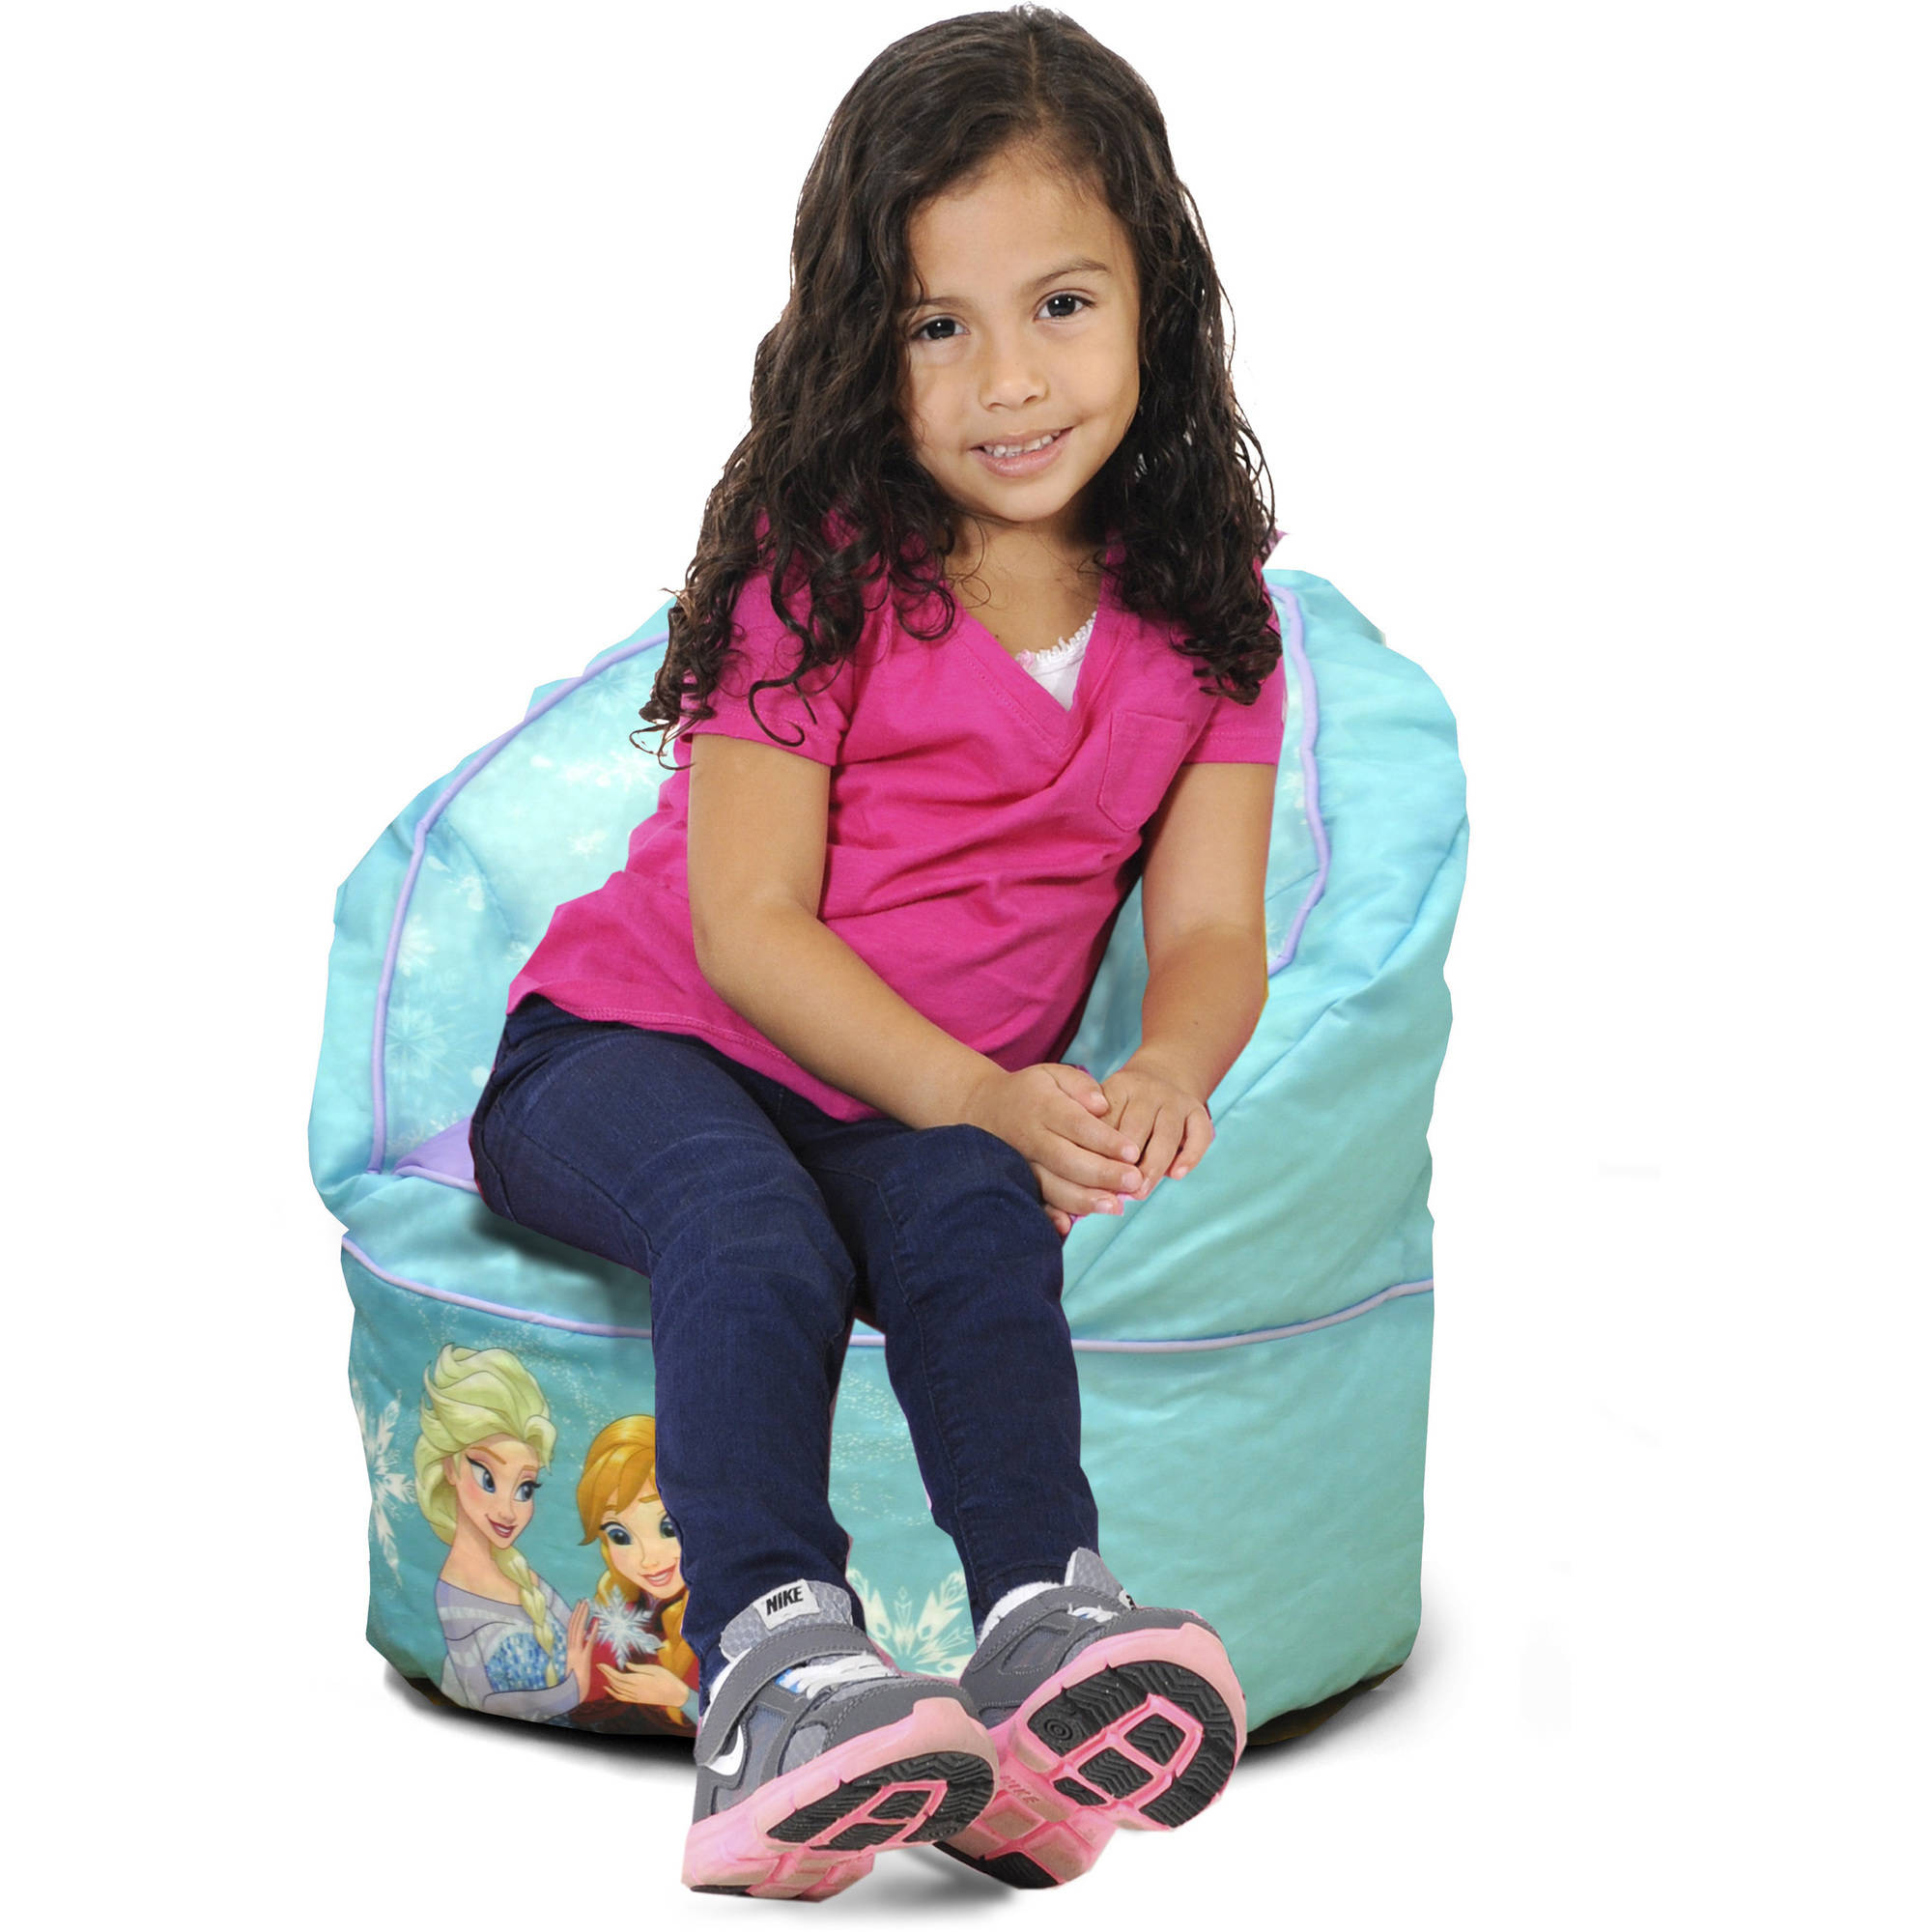 Disney Frozen Sofa Bean Bag Chair with Piping - image 2 of 2